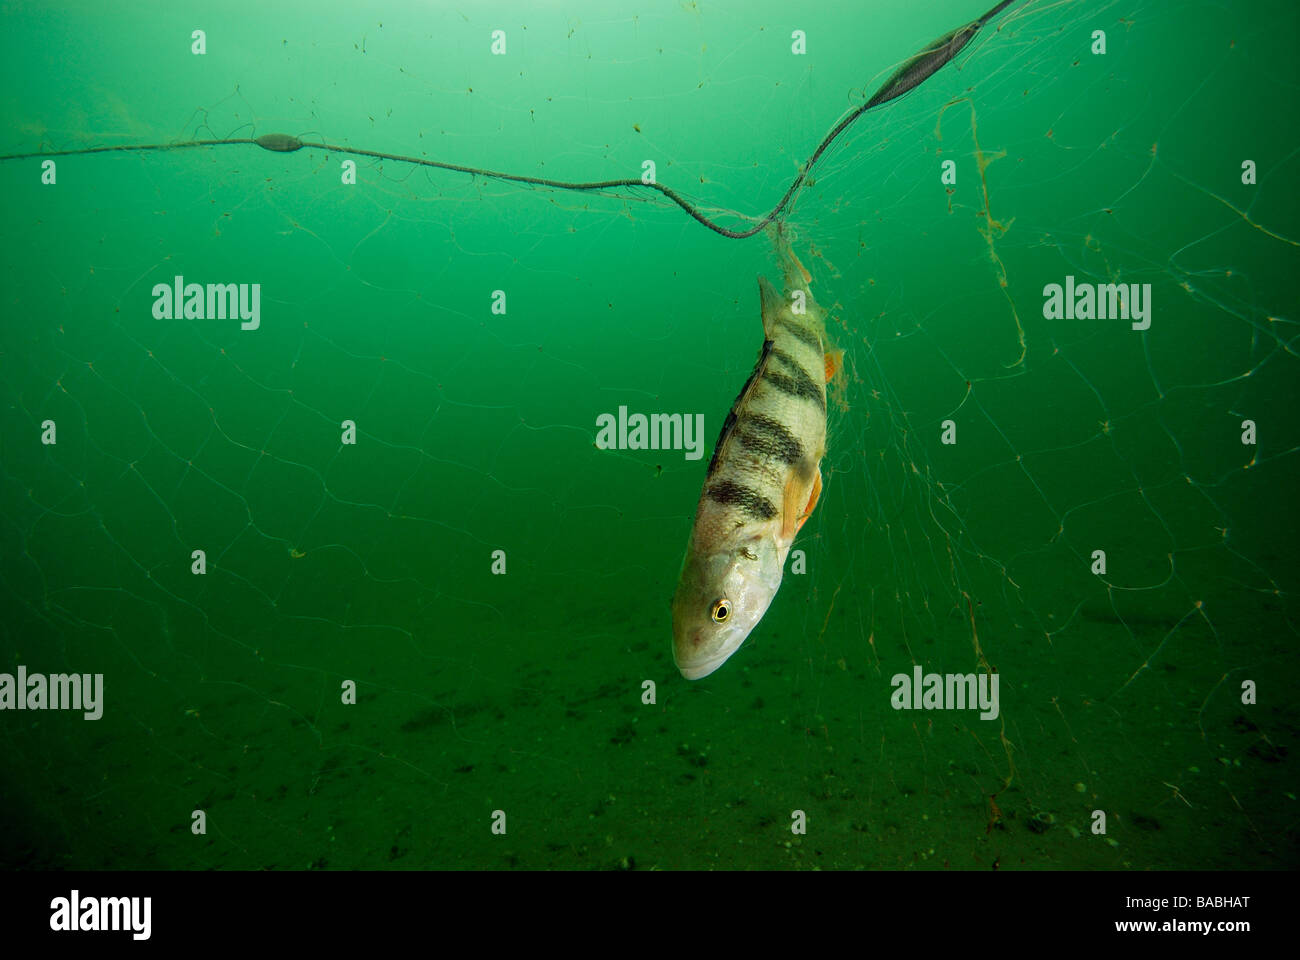 A fish caught in a net under water Stock Photo